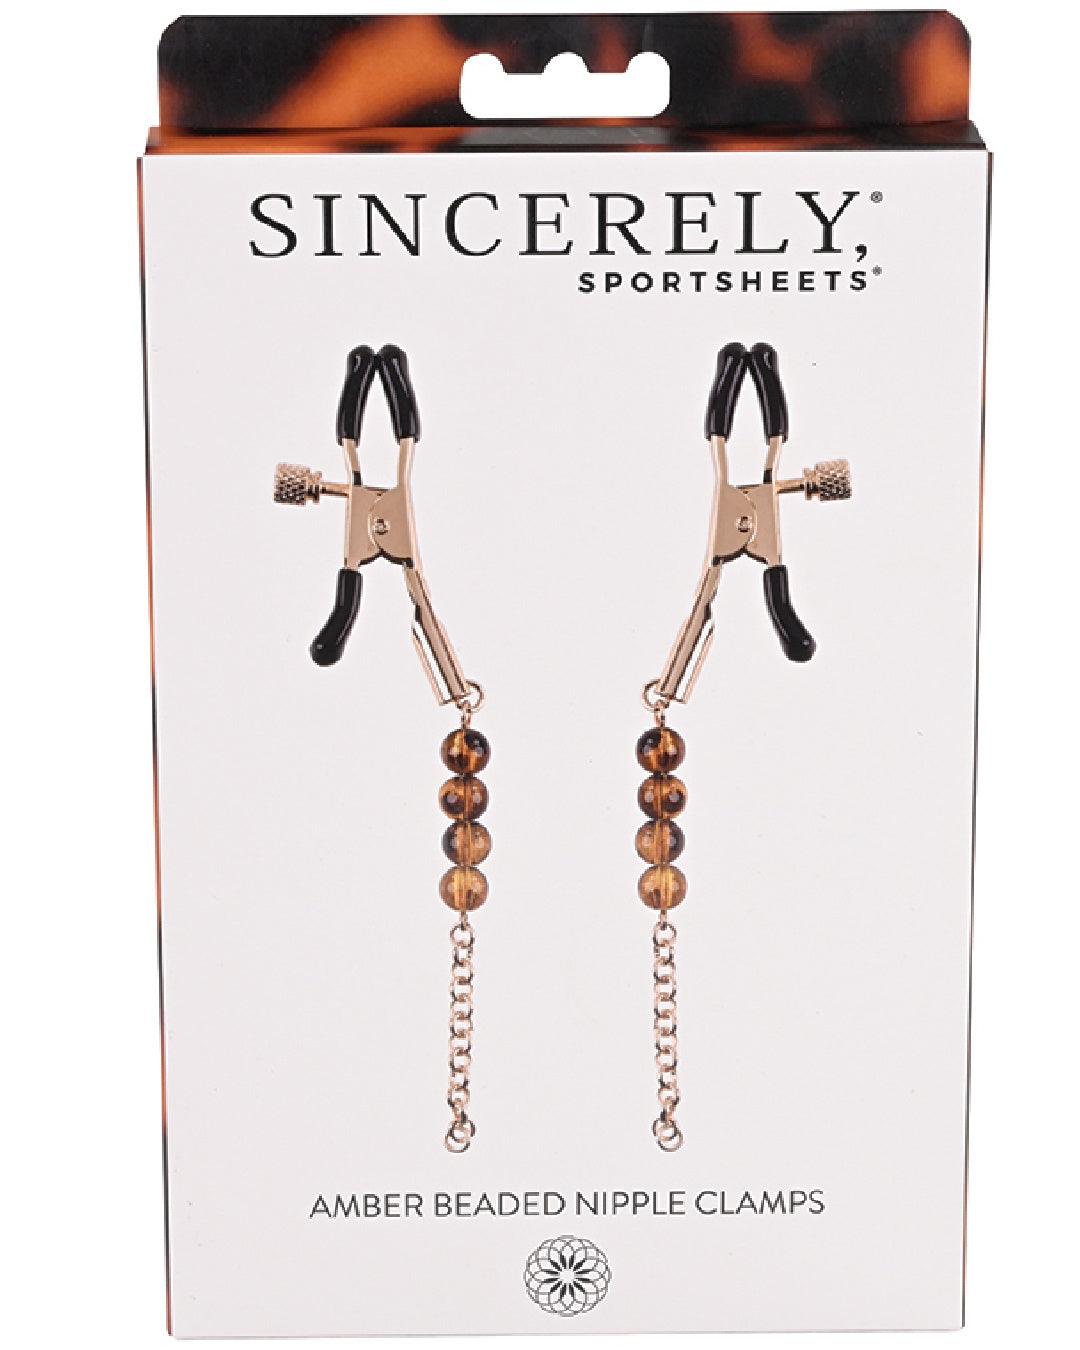 Sincerely Amber Beaded Nipple Clamps box 